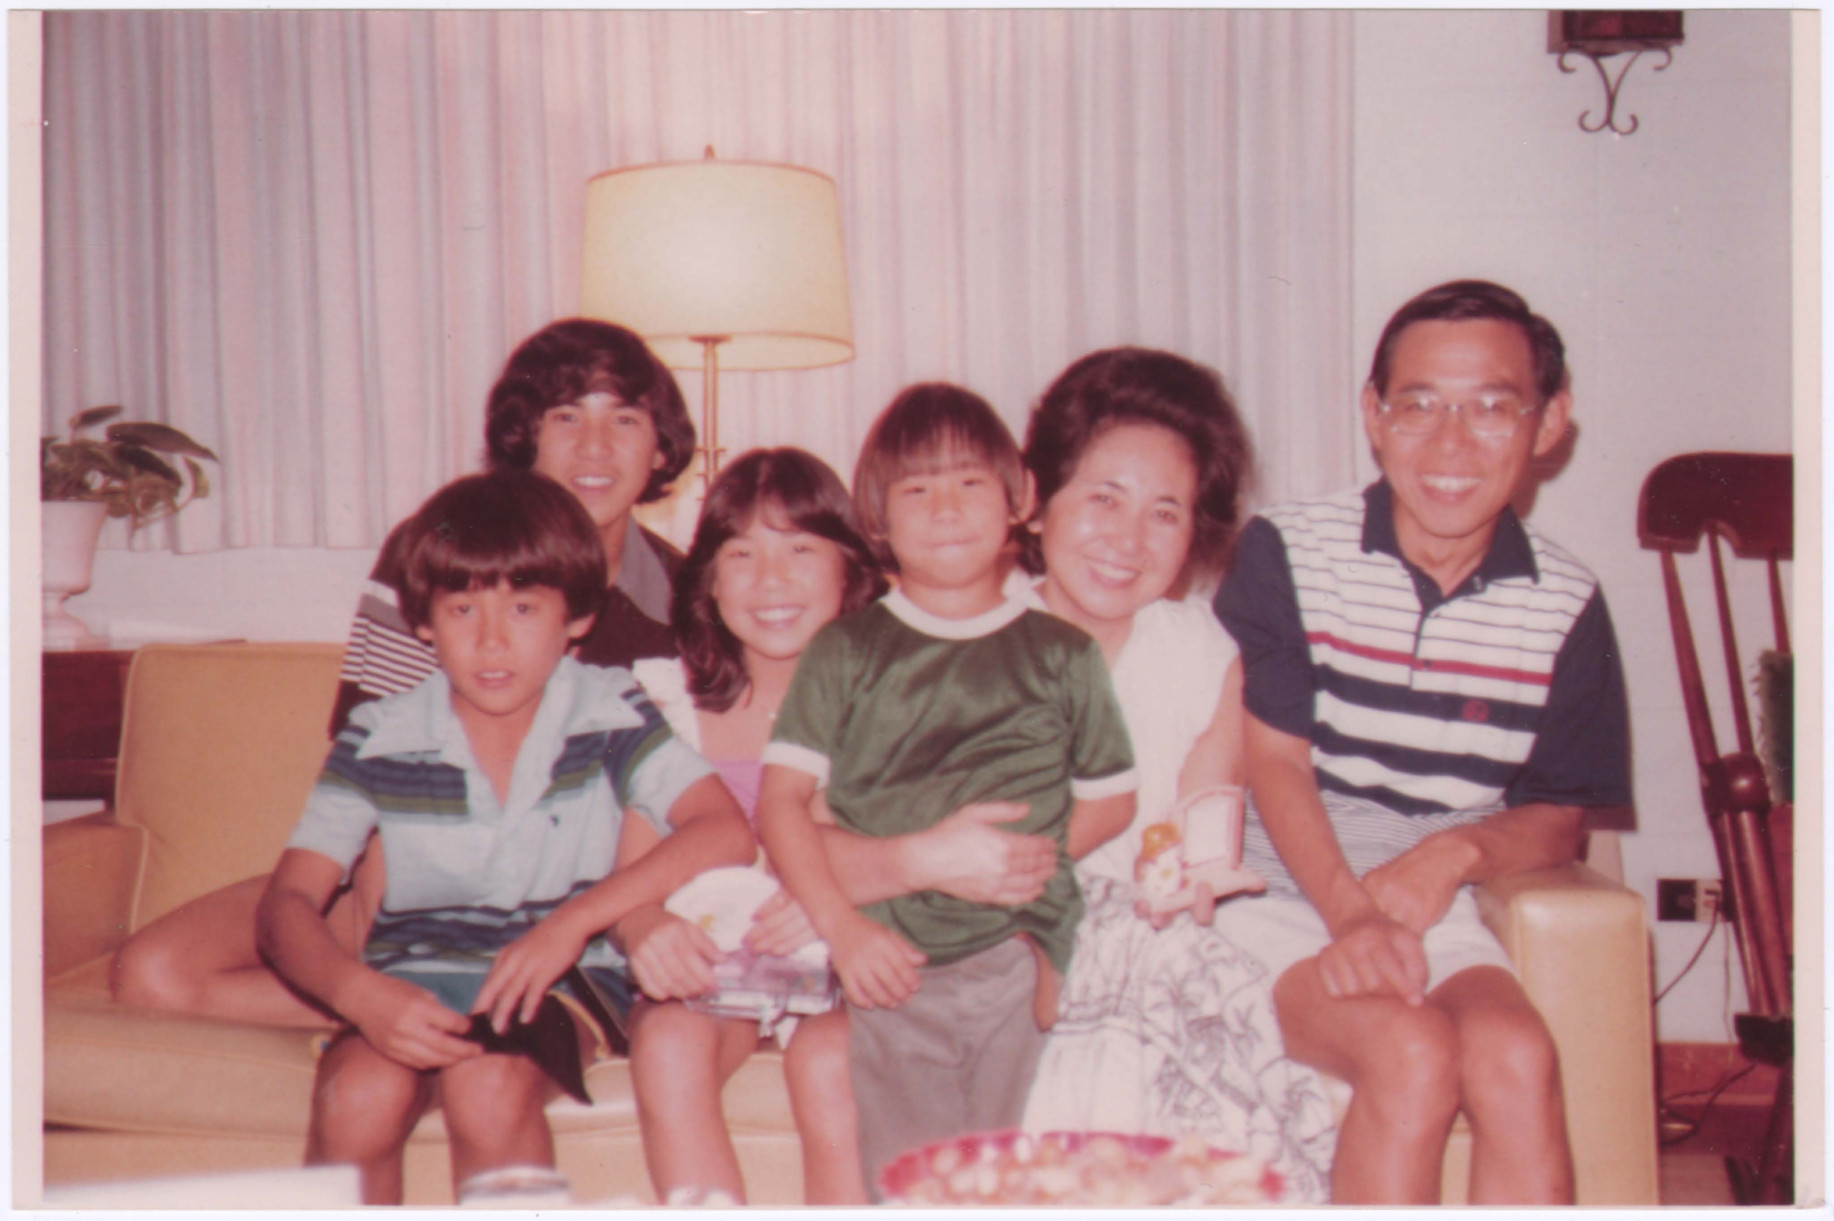 The Miwa family sitting on a couch and smiling, circa 1970s.